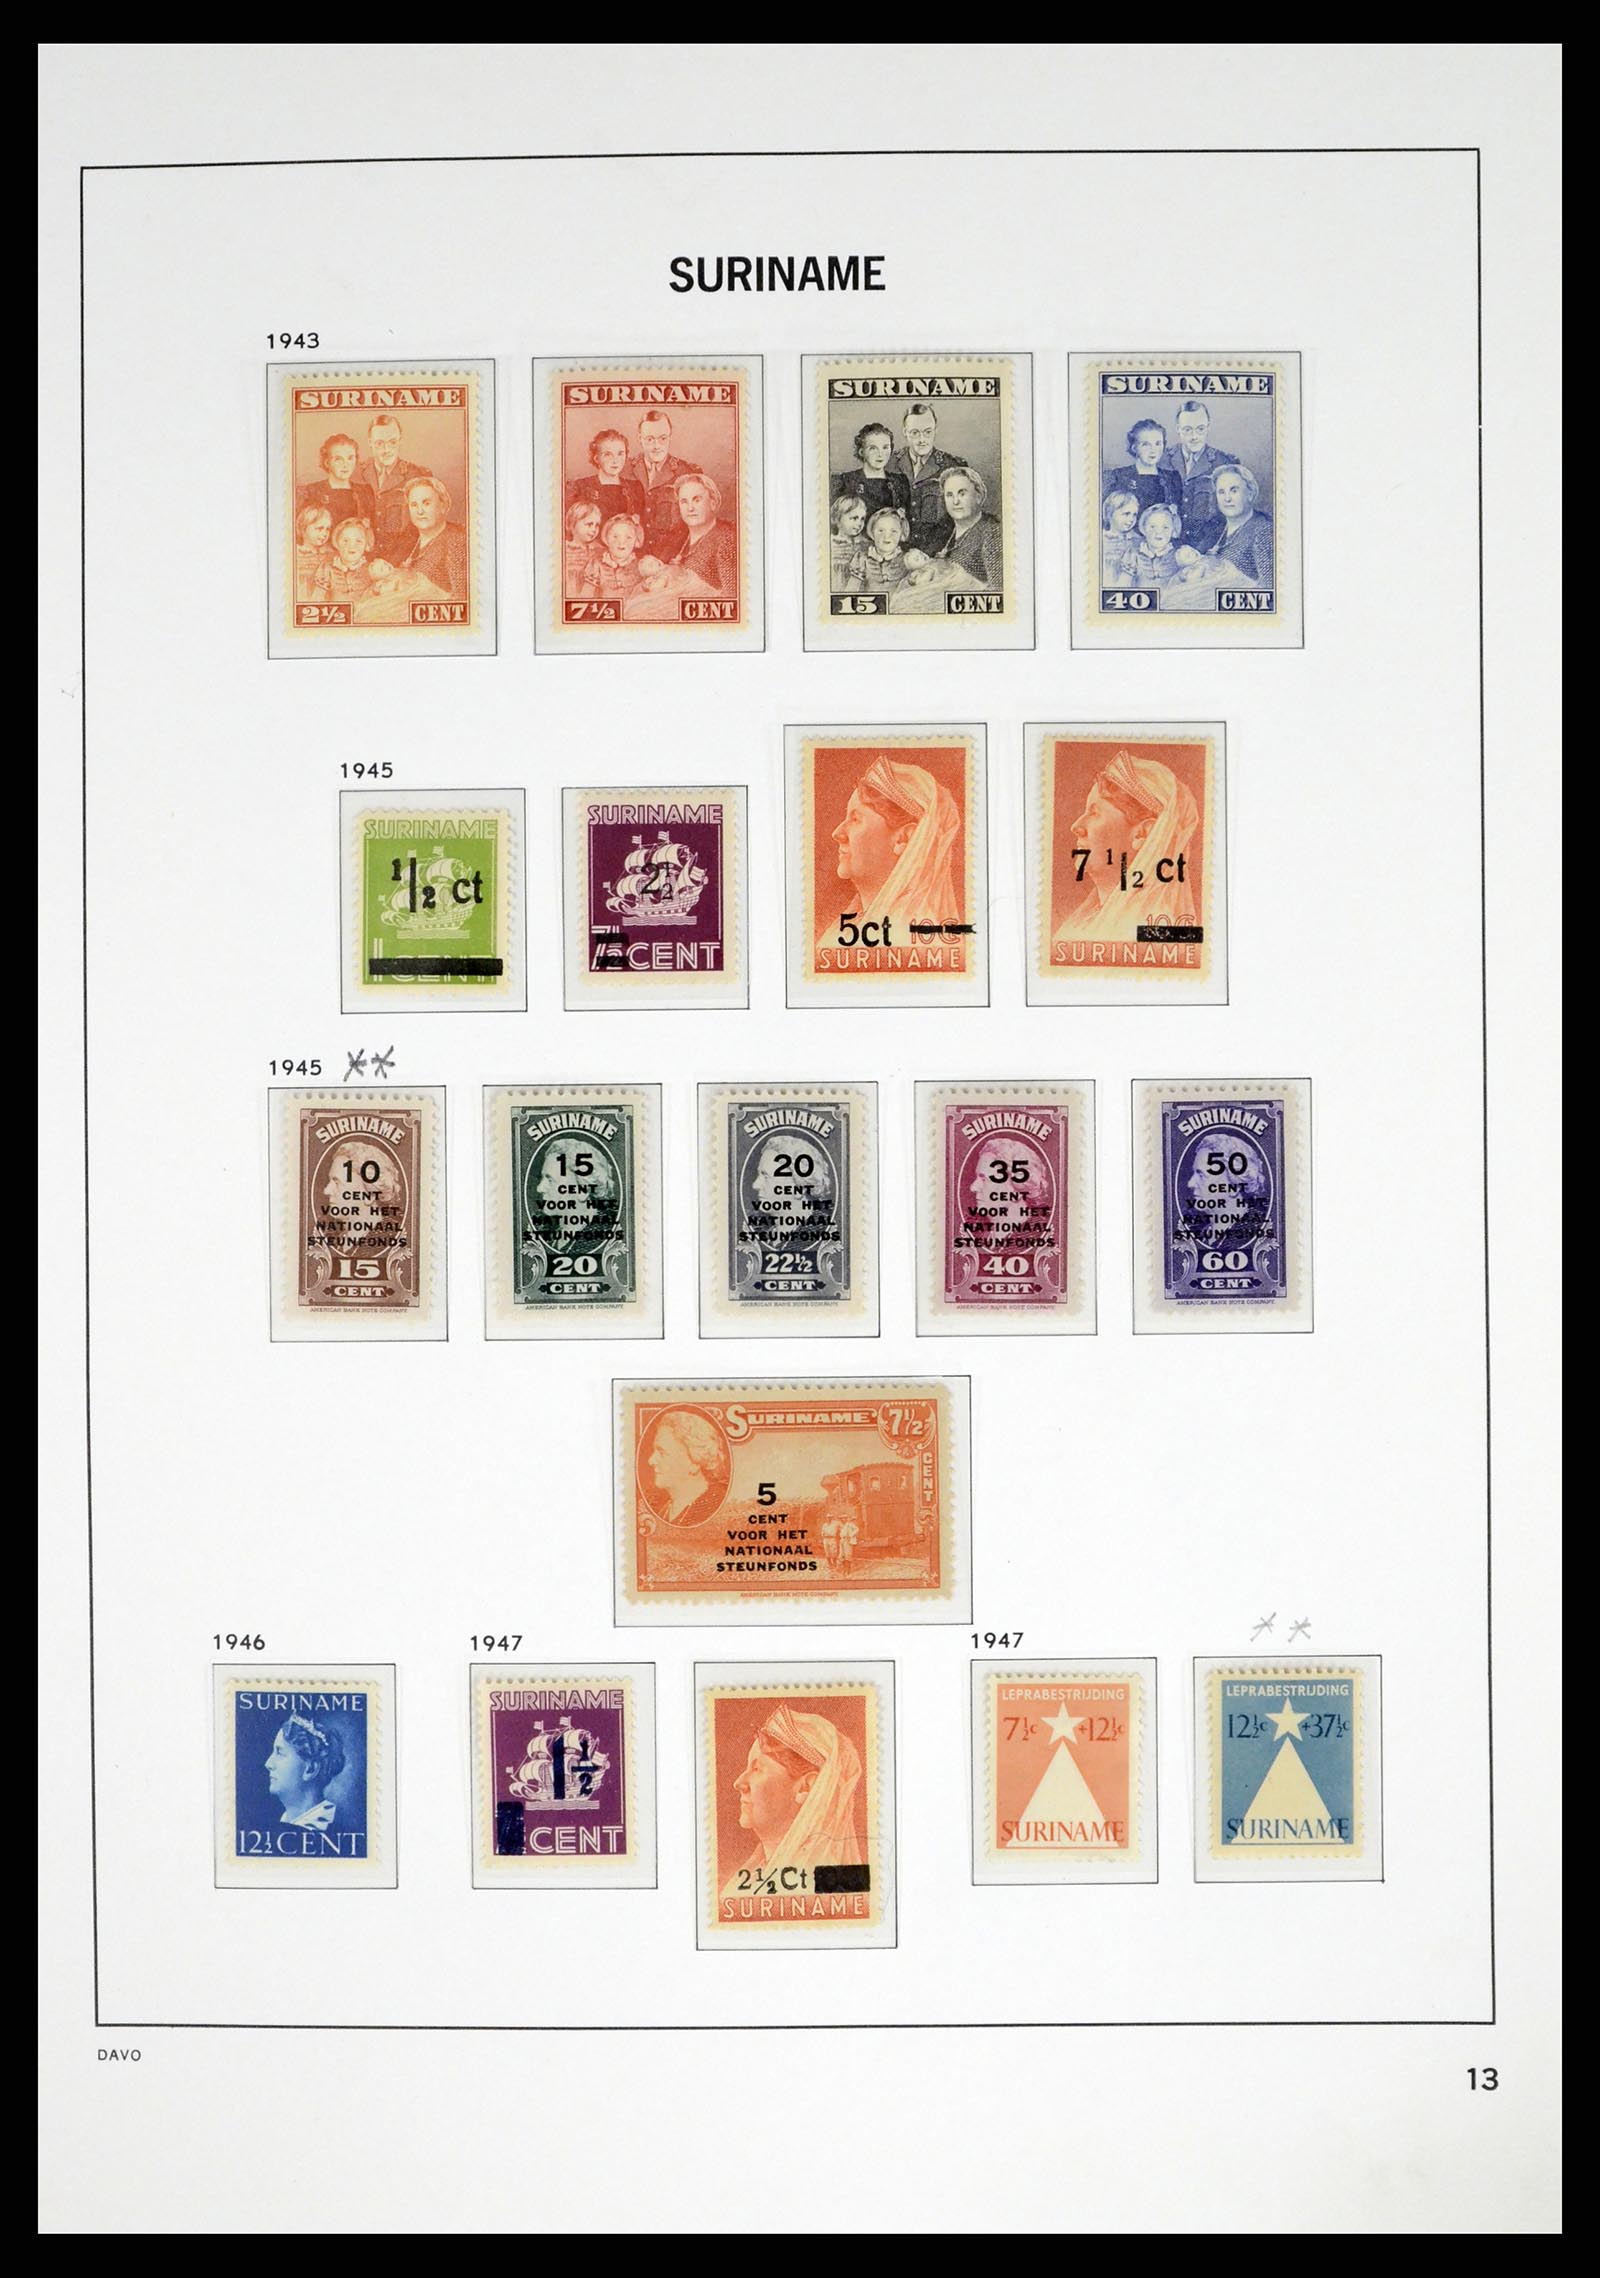 37421 013 - Stamp collection 37421 Suriname 1873-1975.